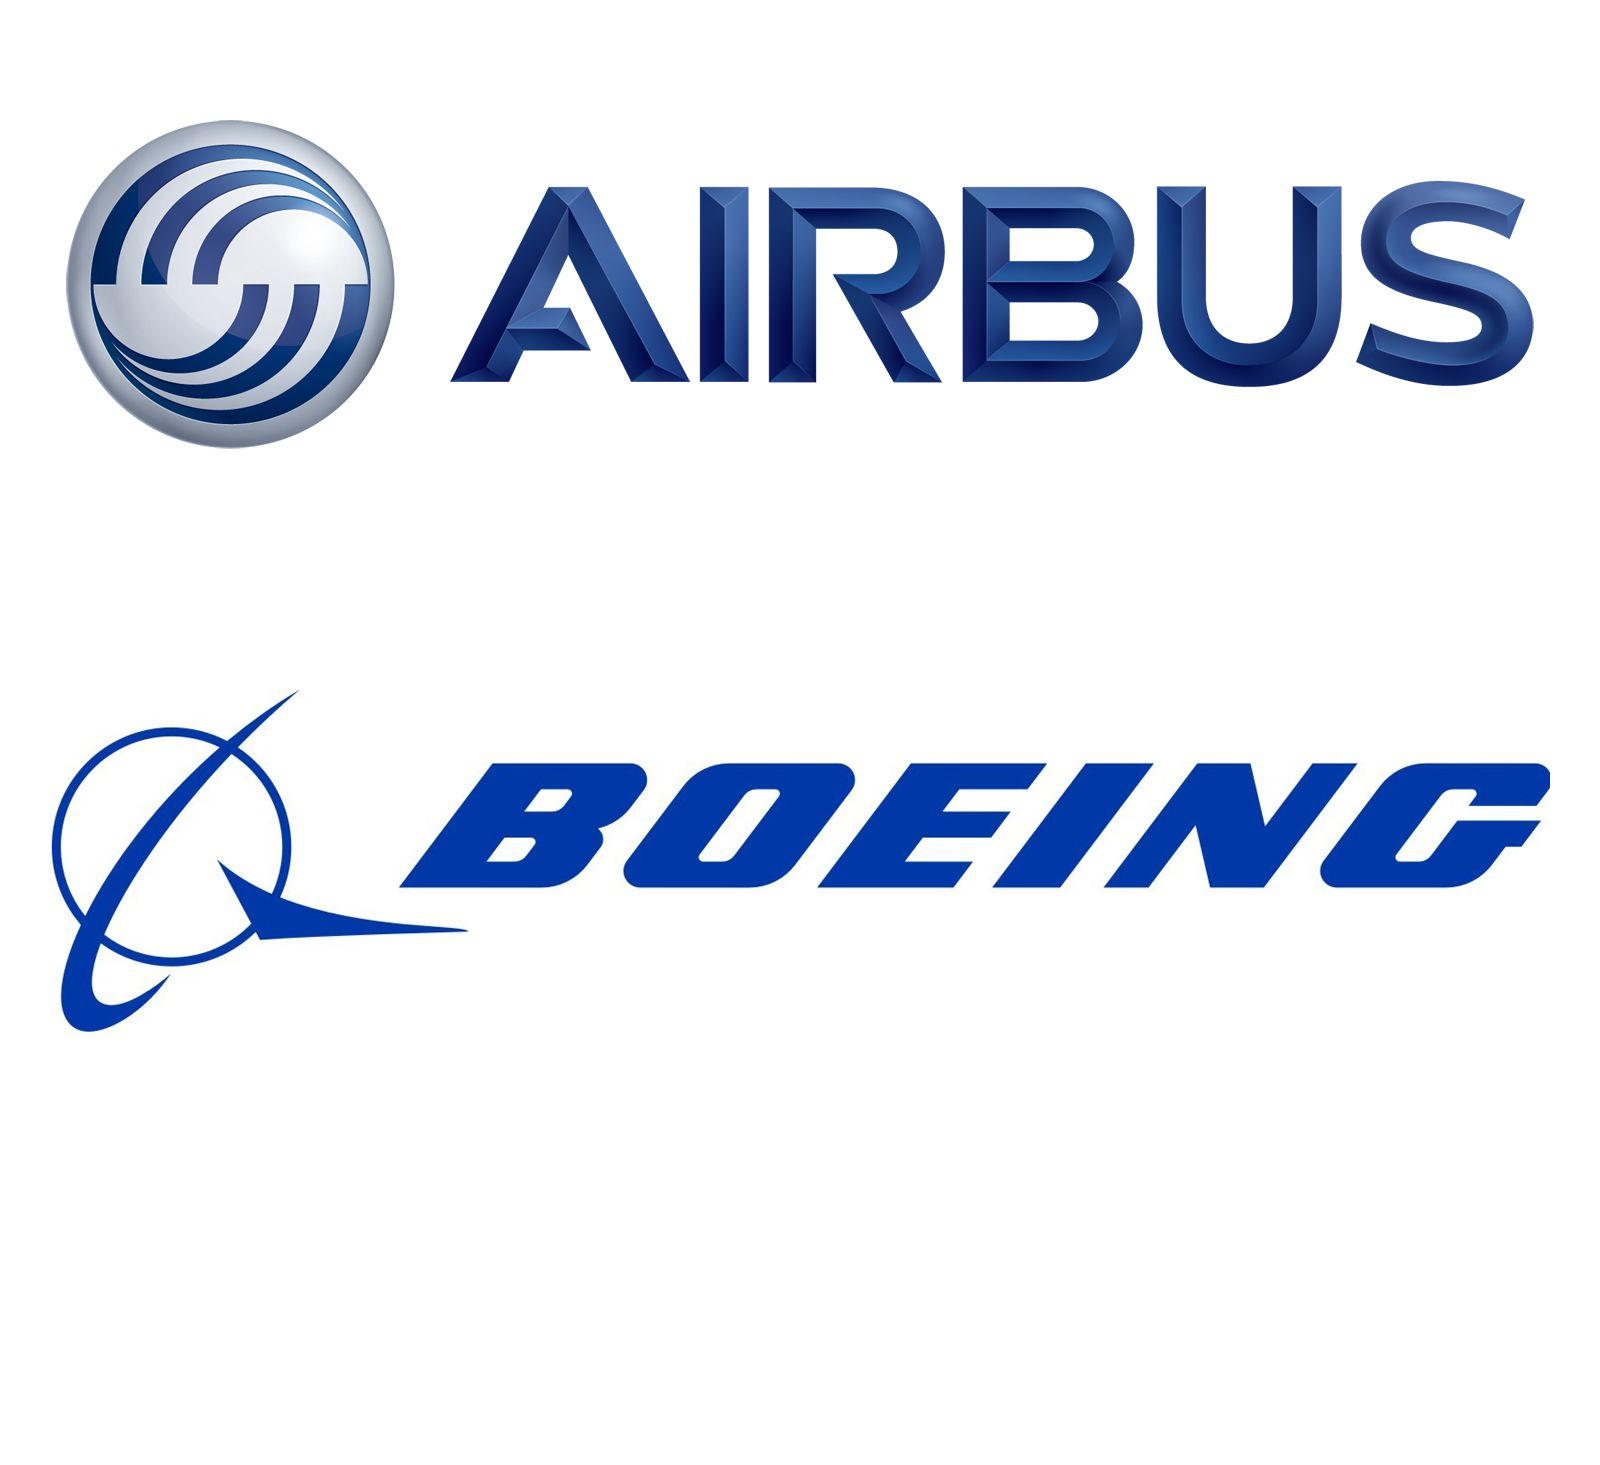 Best Known for Its Airplanes Logo - Top Selling Airplanes in Commercial Aviation History - Poente Technical